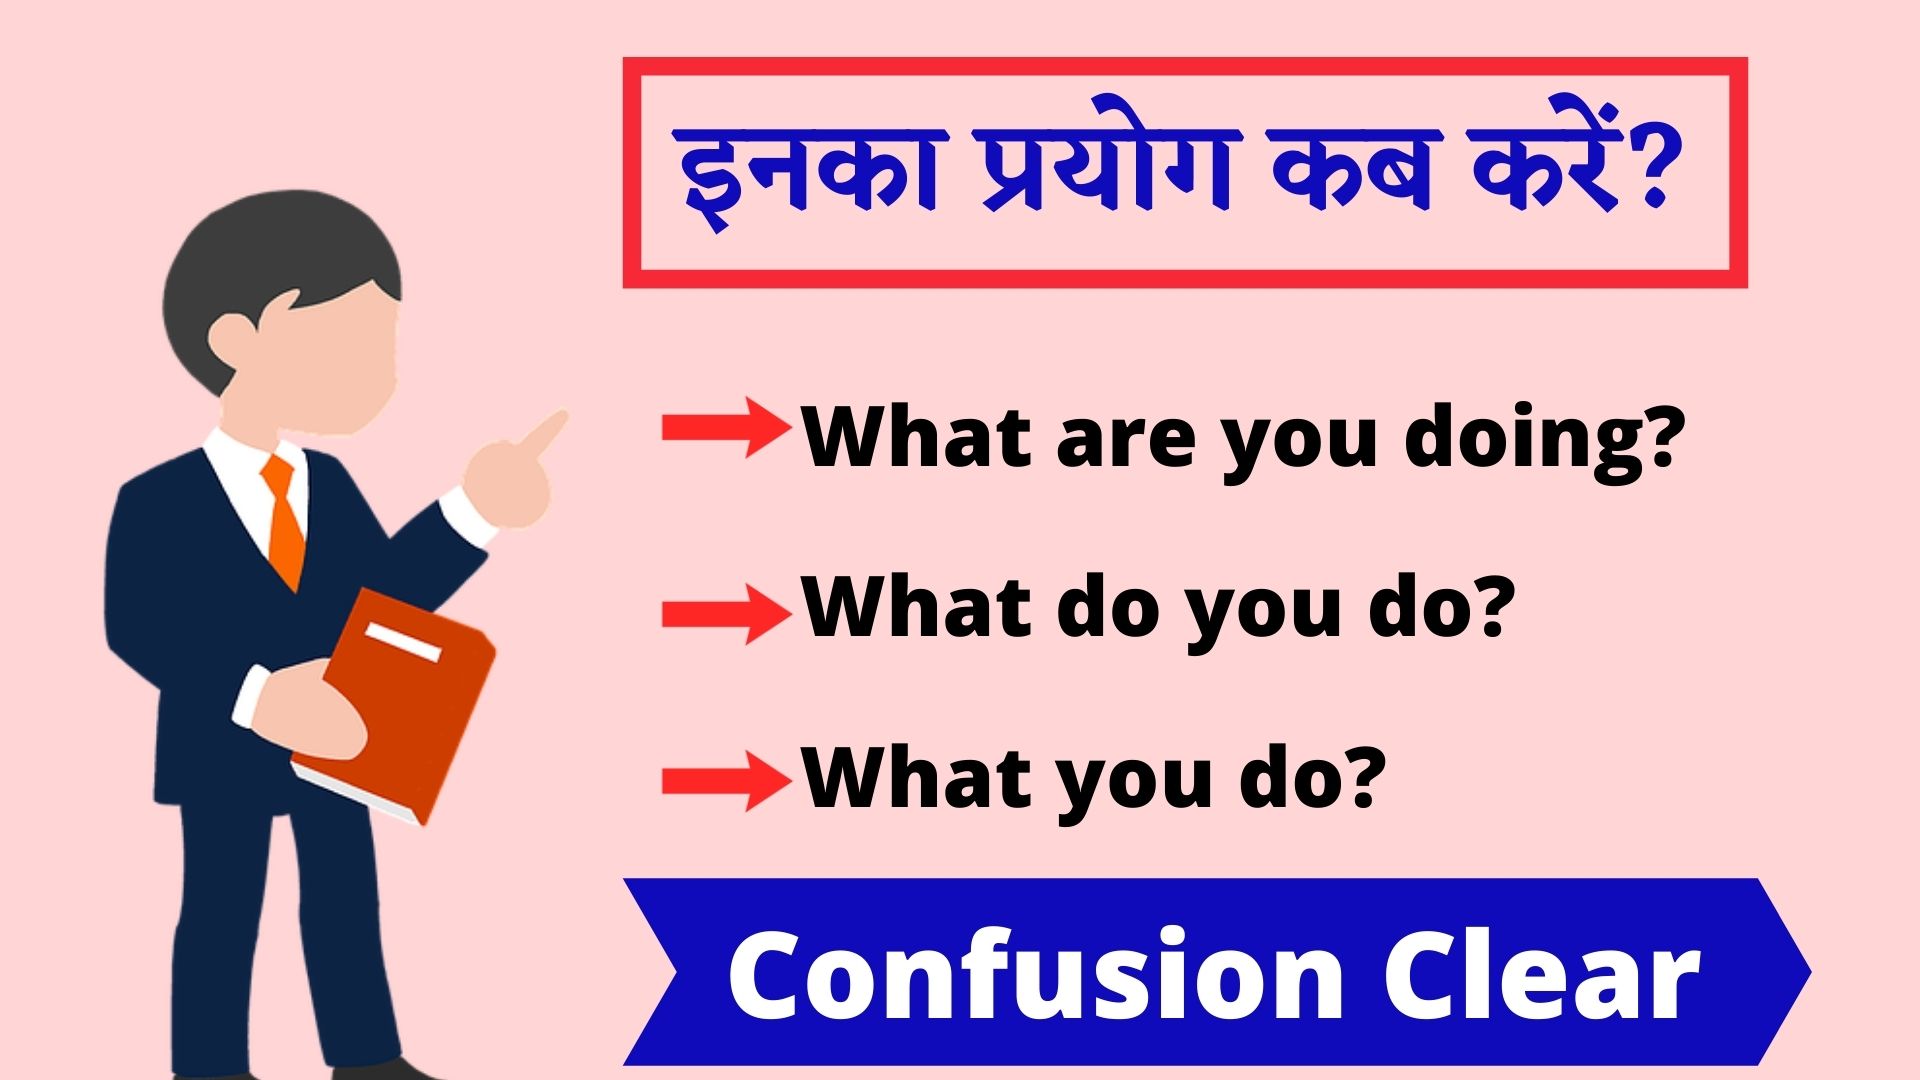 How Are You Meaning In Hindi – हाउ आर यू का मतलब